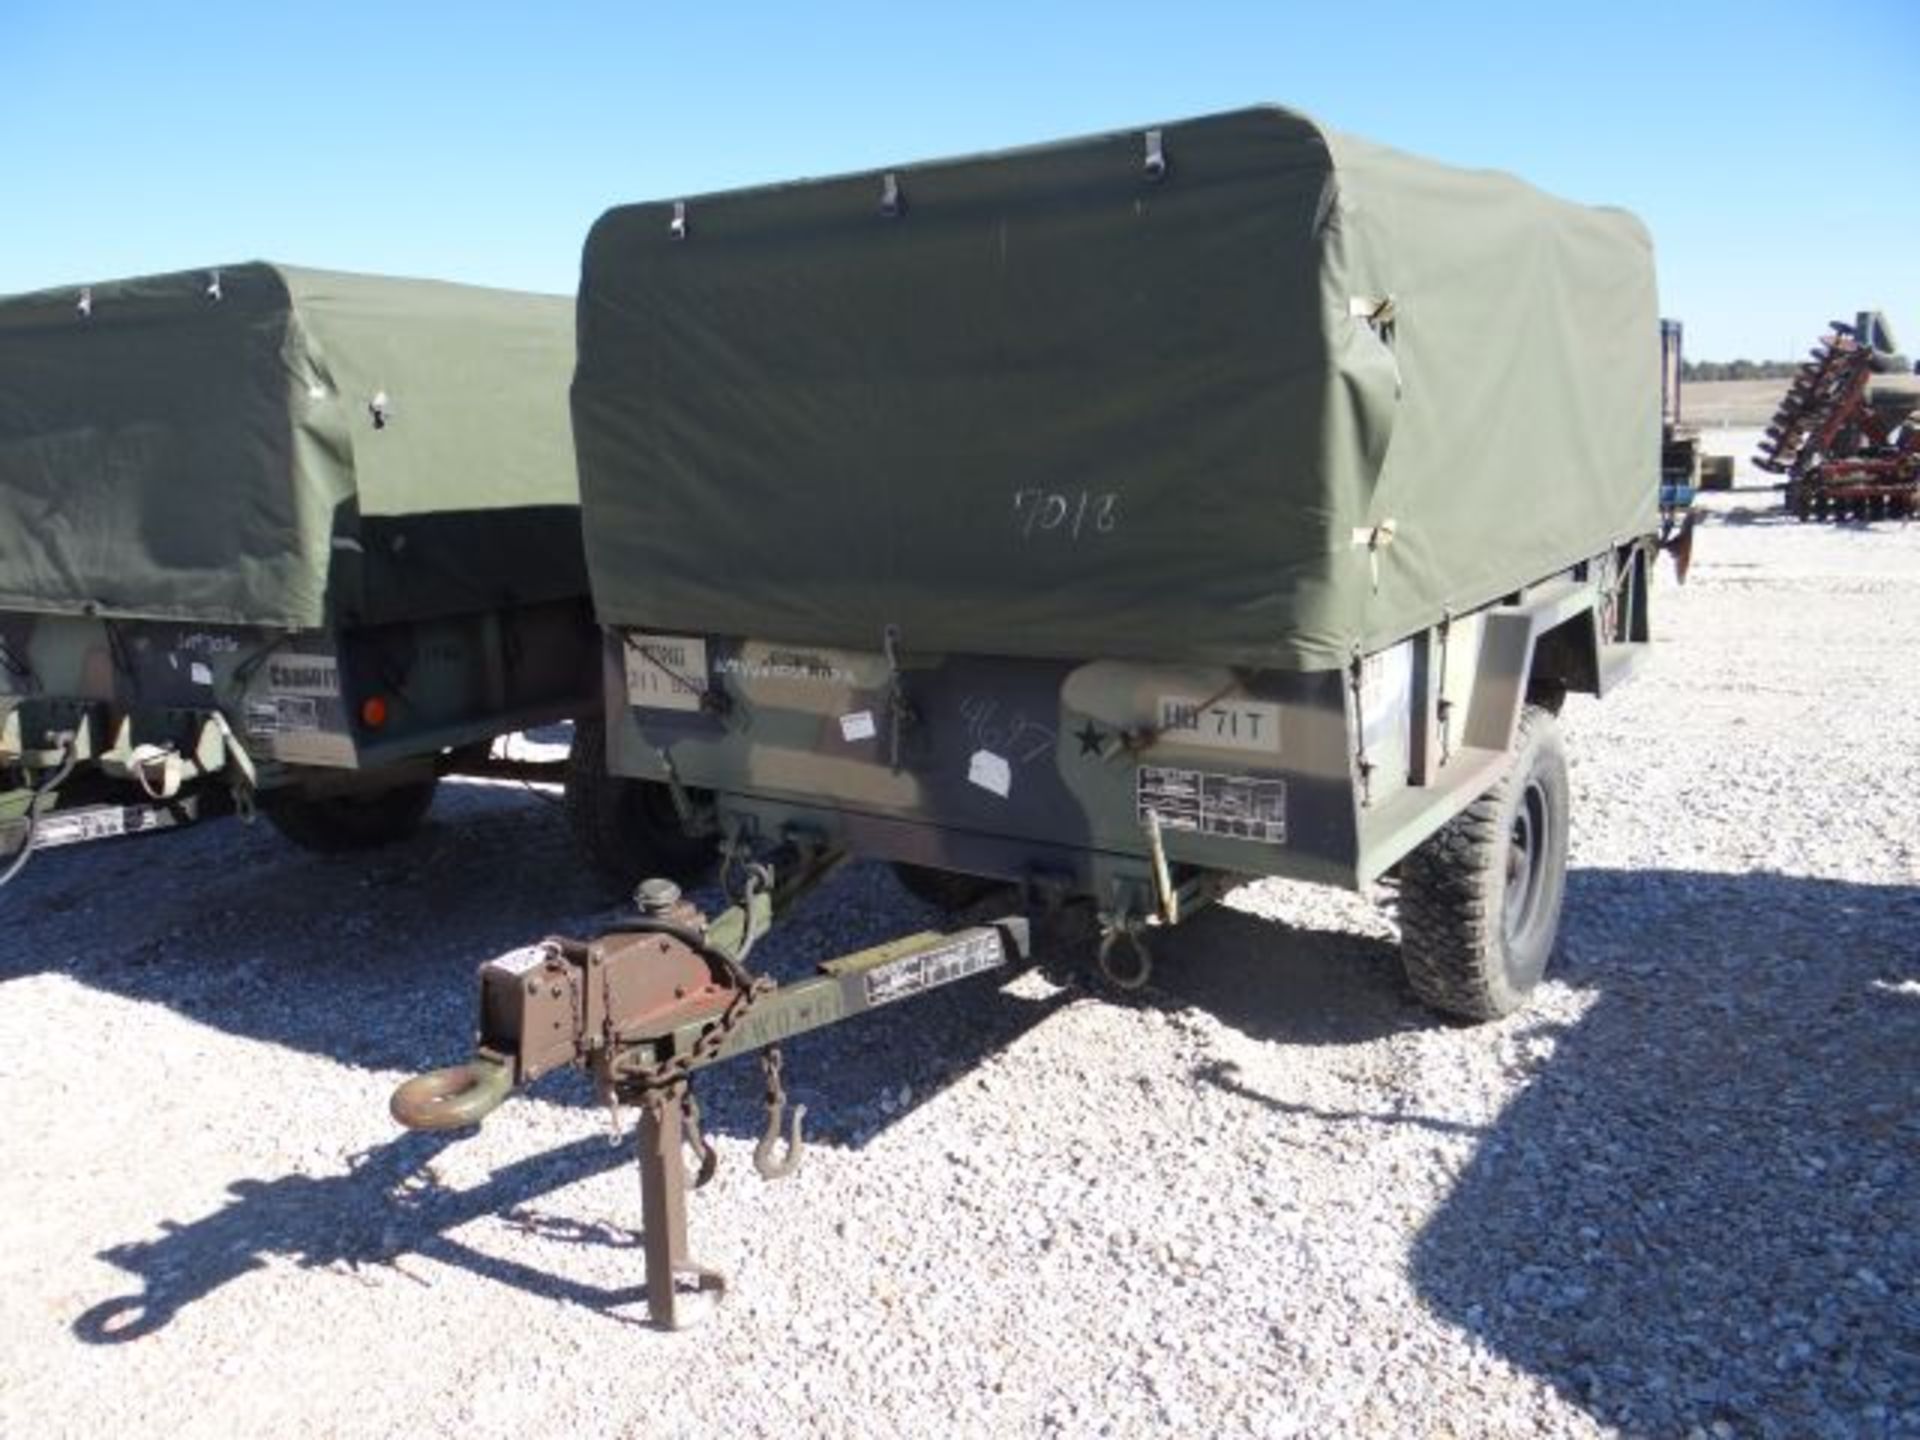 1990 Military Trailer 3/4 Ton, Pintle Hitch, Cargo Tarp, Title in the Office - Image 2 of 3